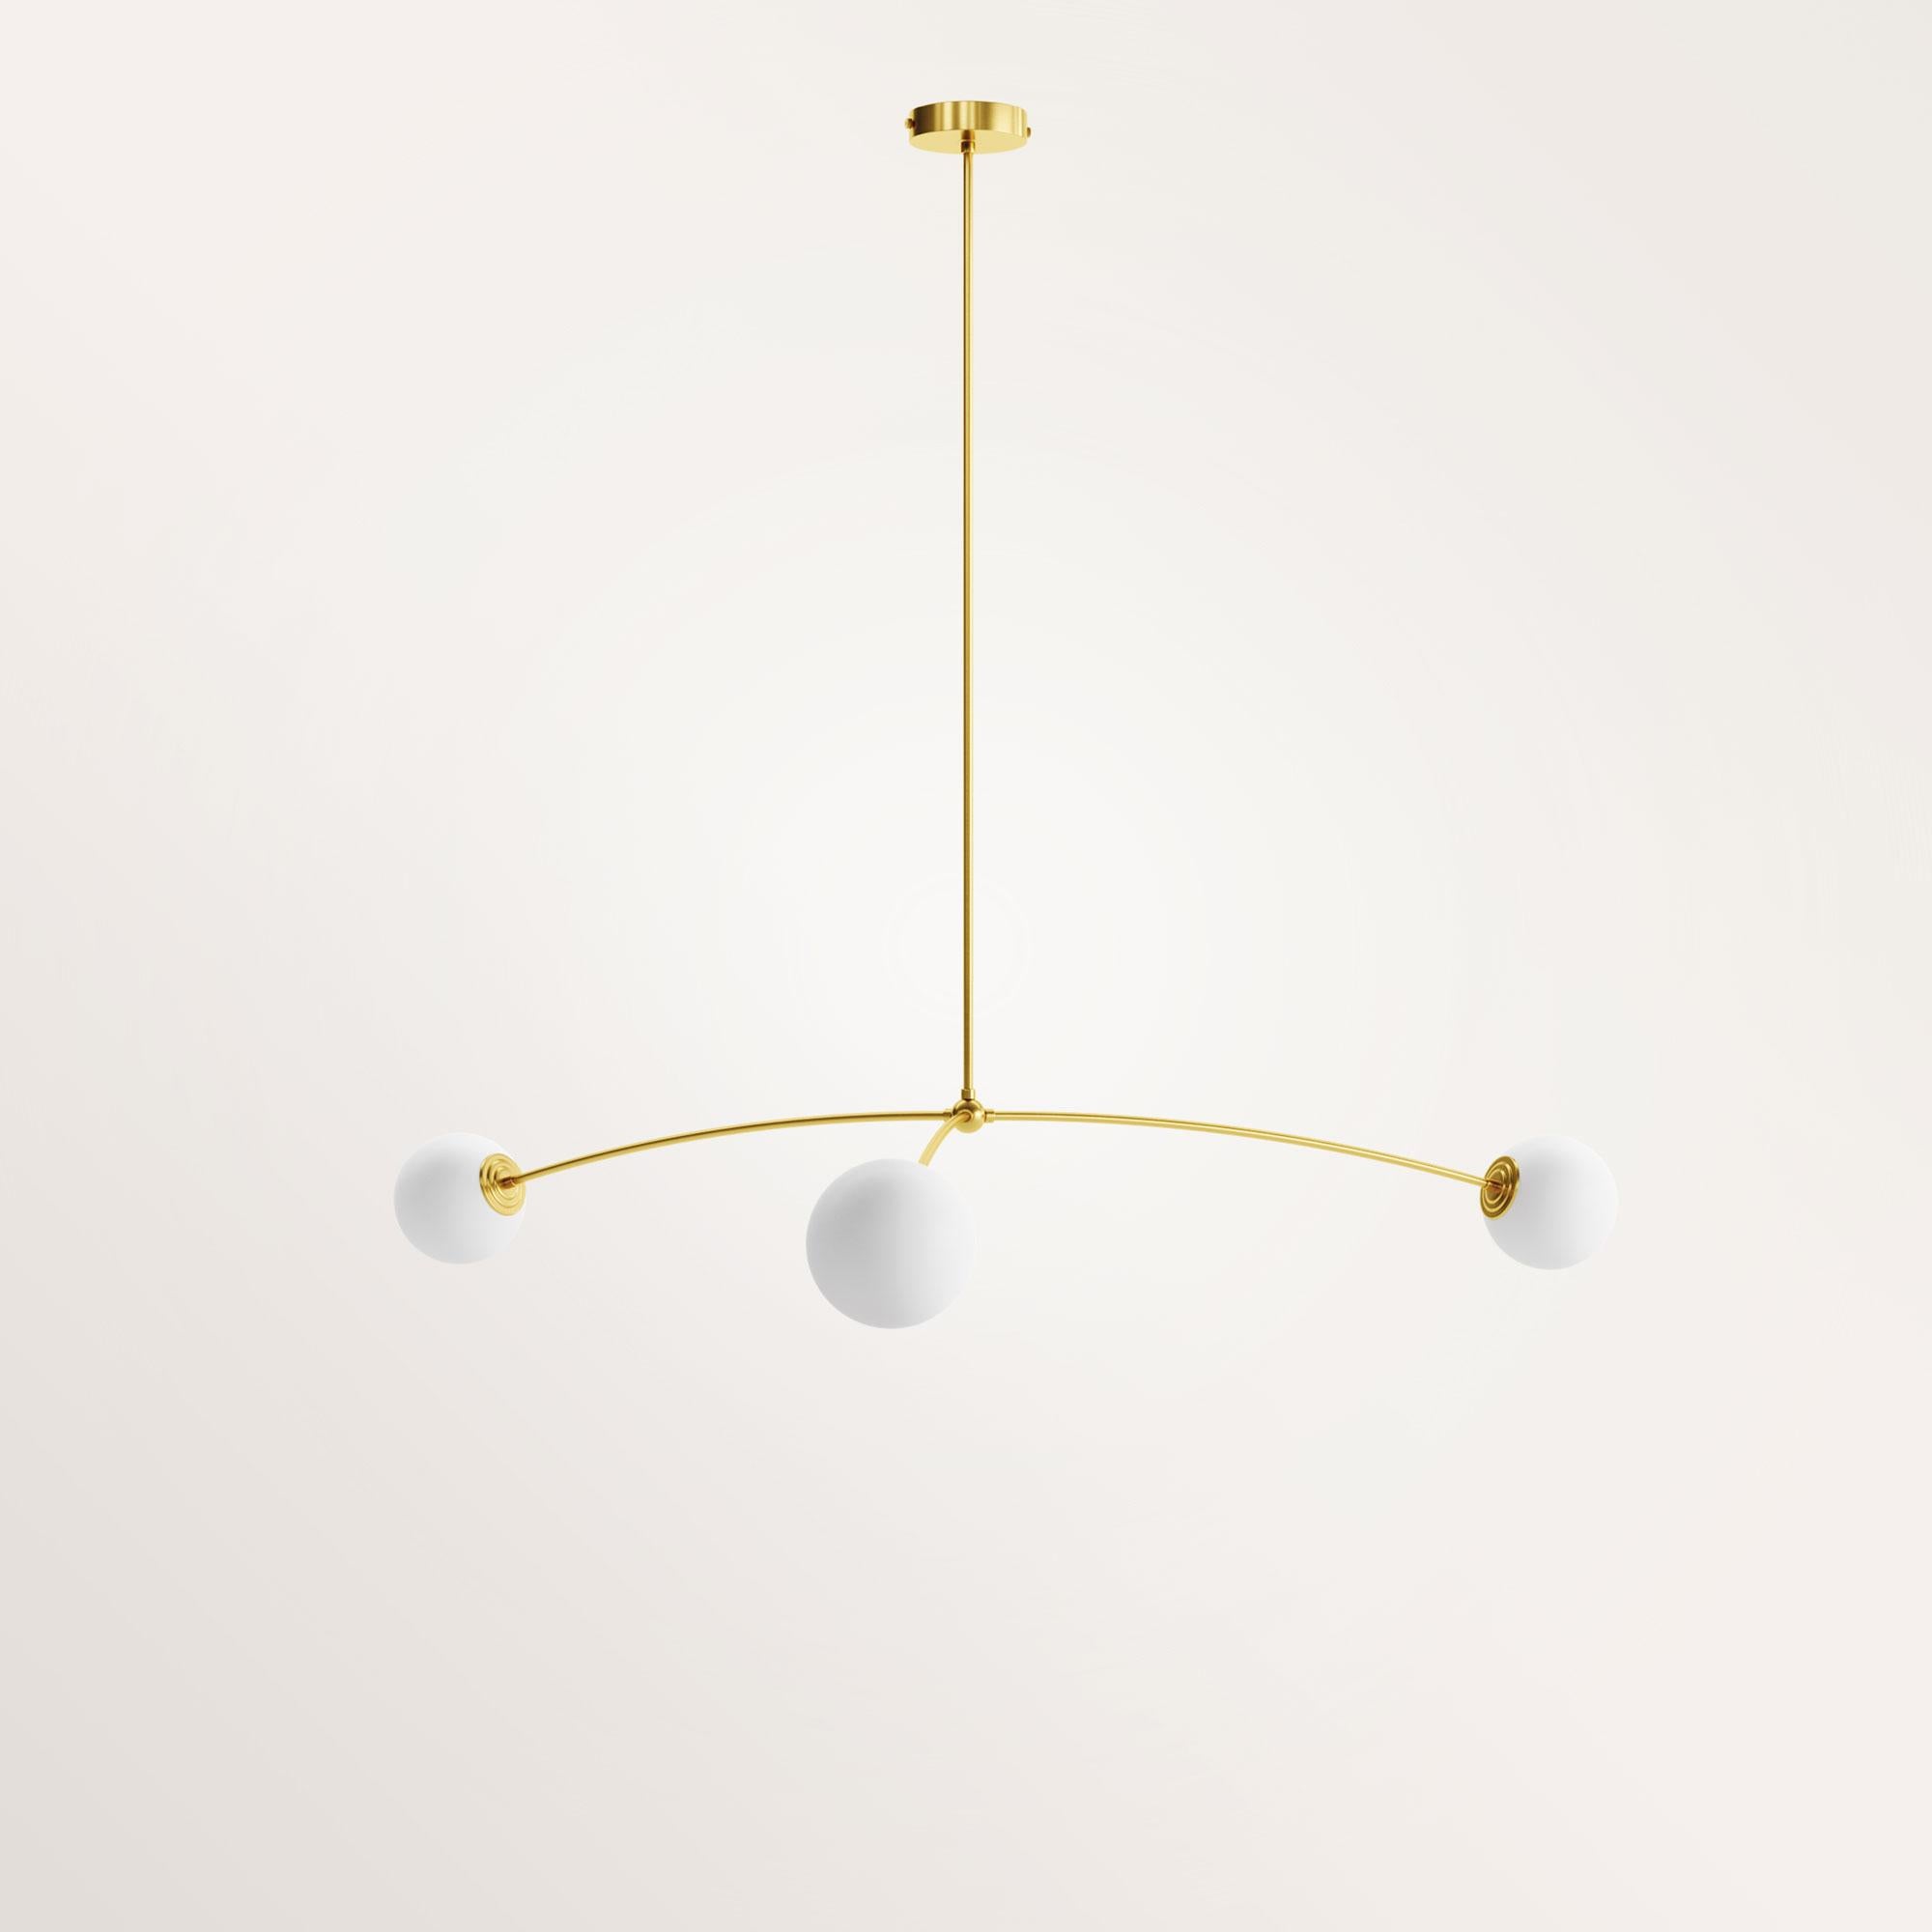 Handmade Eole I chandelier by Gobo Lights
Dimensions: 100 L x 100 l x 100 H
Materials: Brass, opaline

Goddess of the fair anger, the revenge and the balance.

Self-taught and from the world of chemistry, this Belgian craftsman / designer